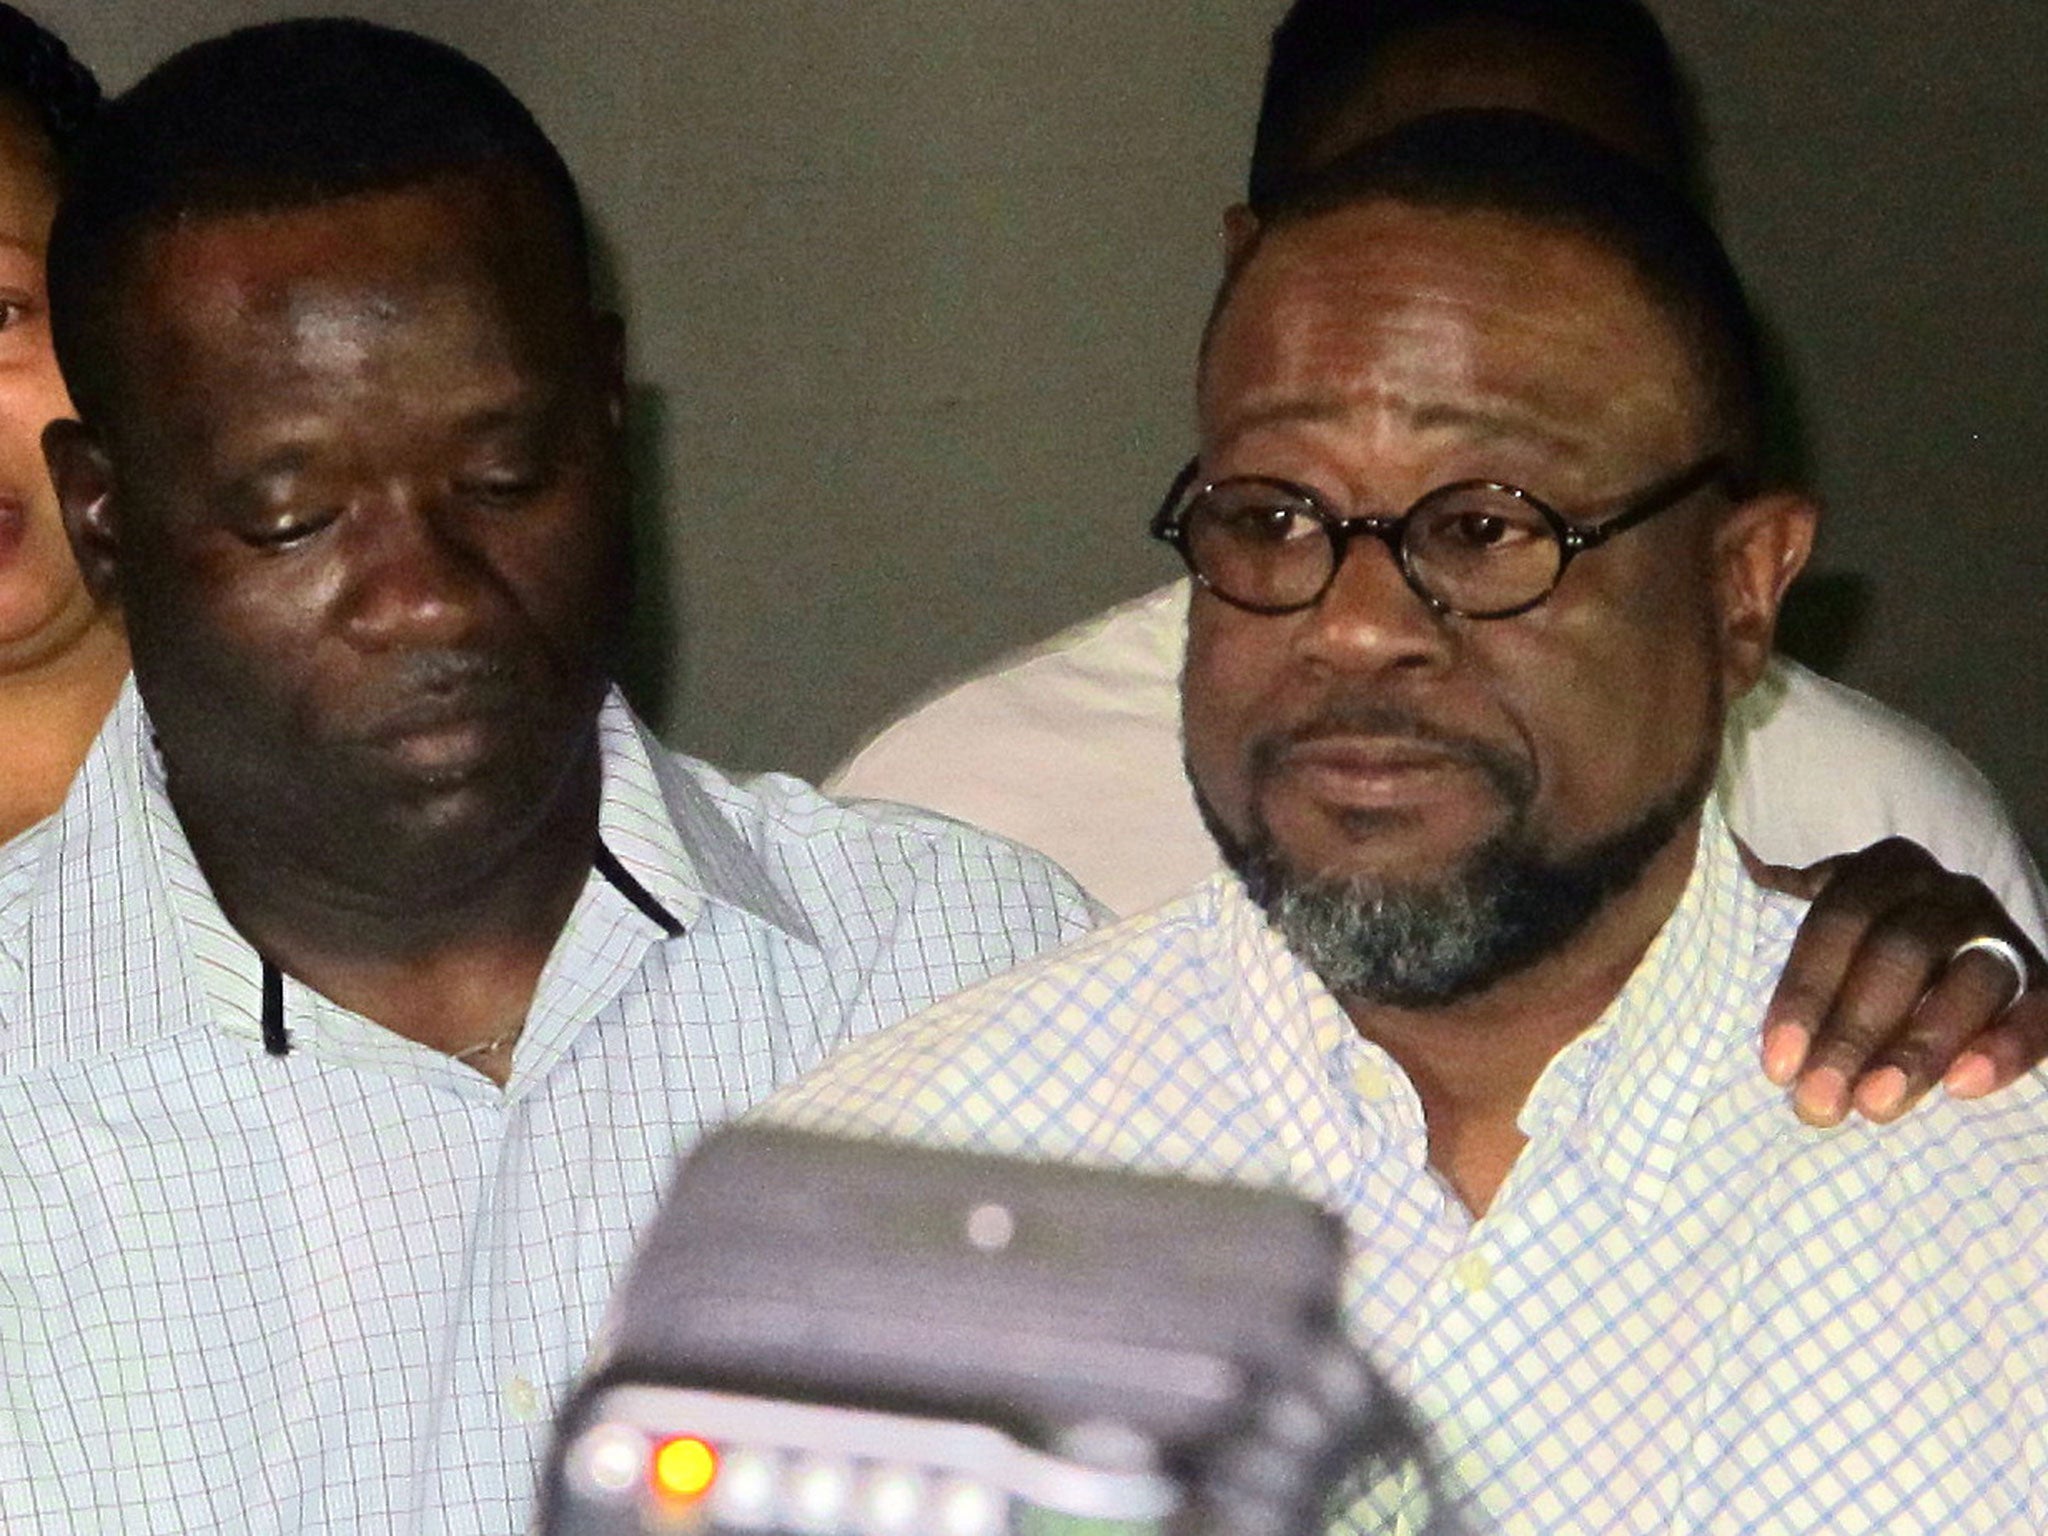 Brothers of Walter Scott, Rodney Scott Anthony Scott appear at a news conference in Charleston after the shooting